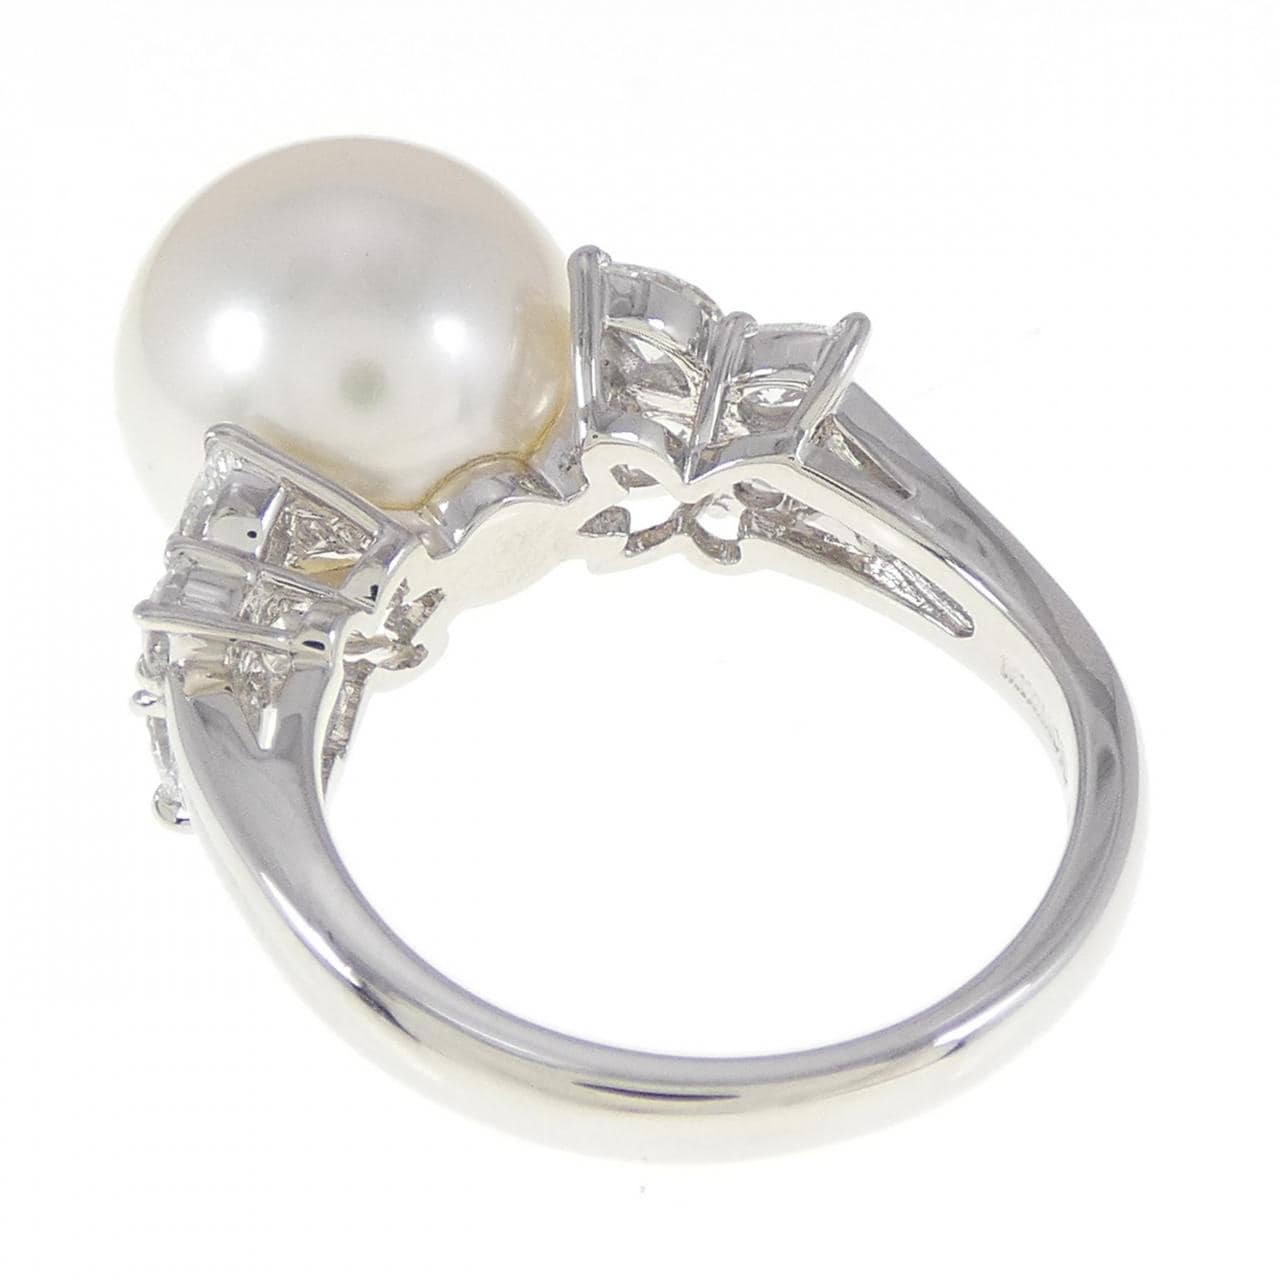 MIKIMOTO White Butterfly Pearl Ring 11.4mm